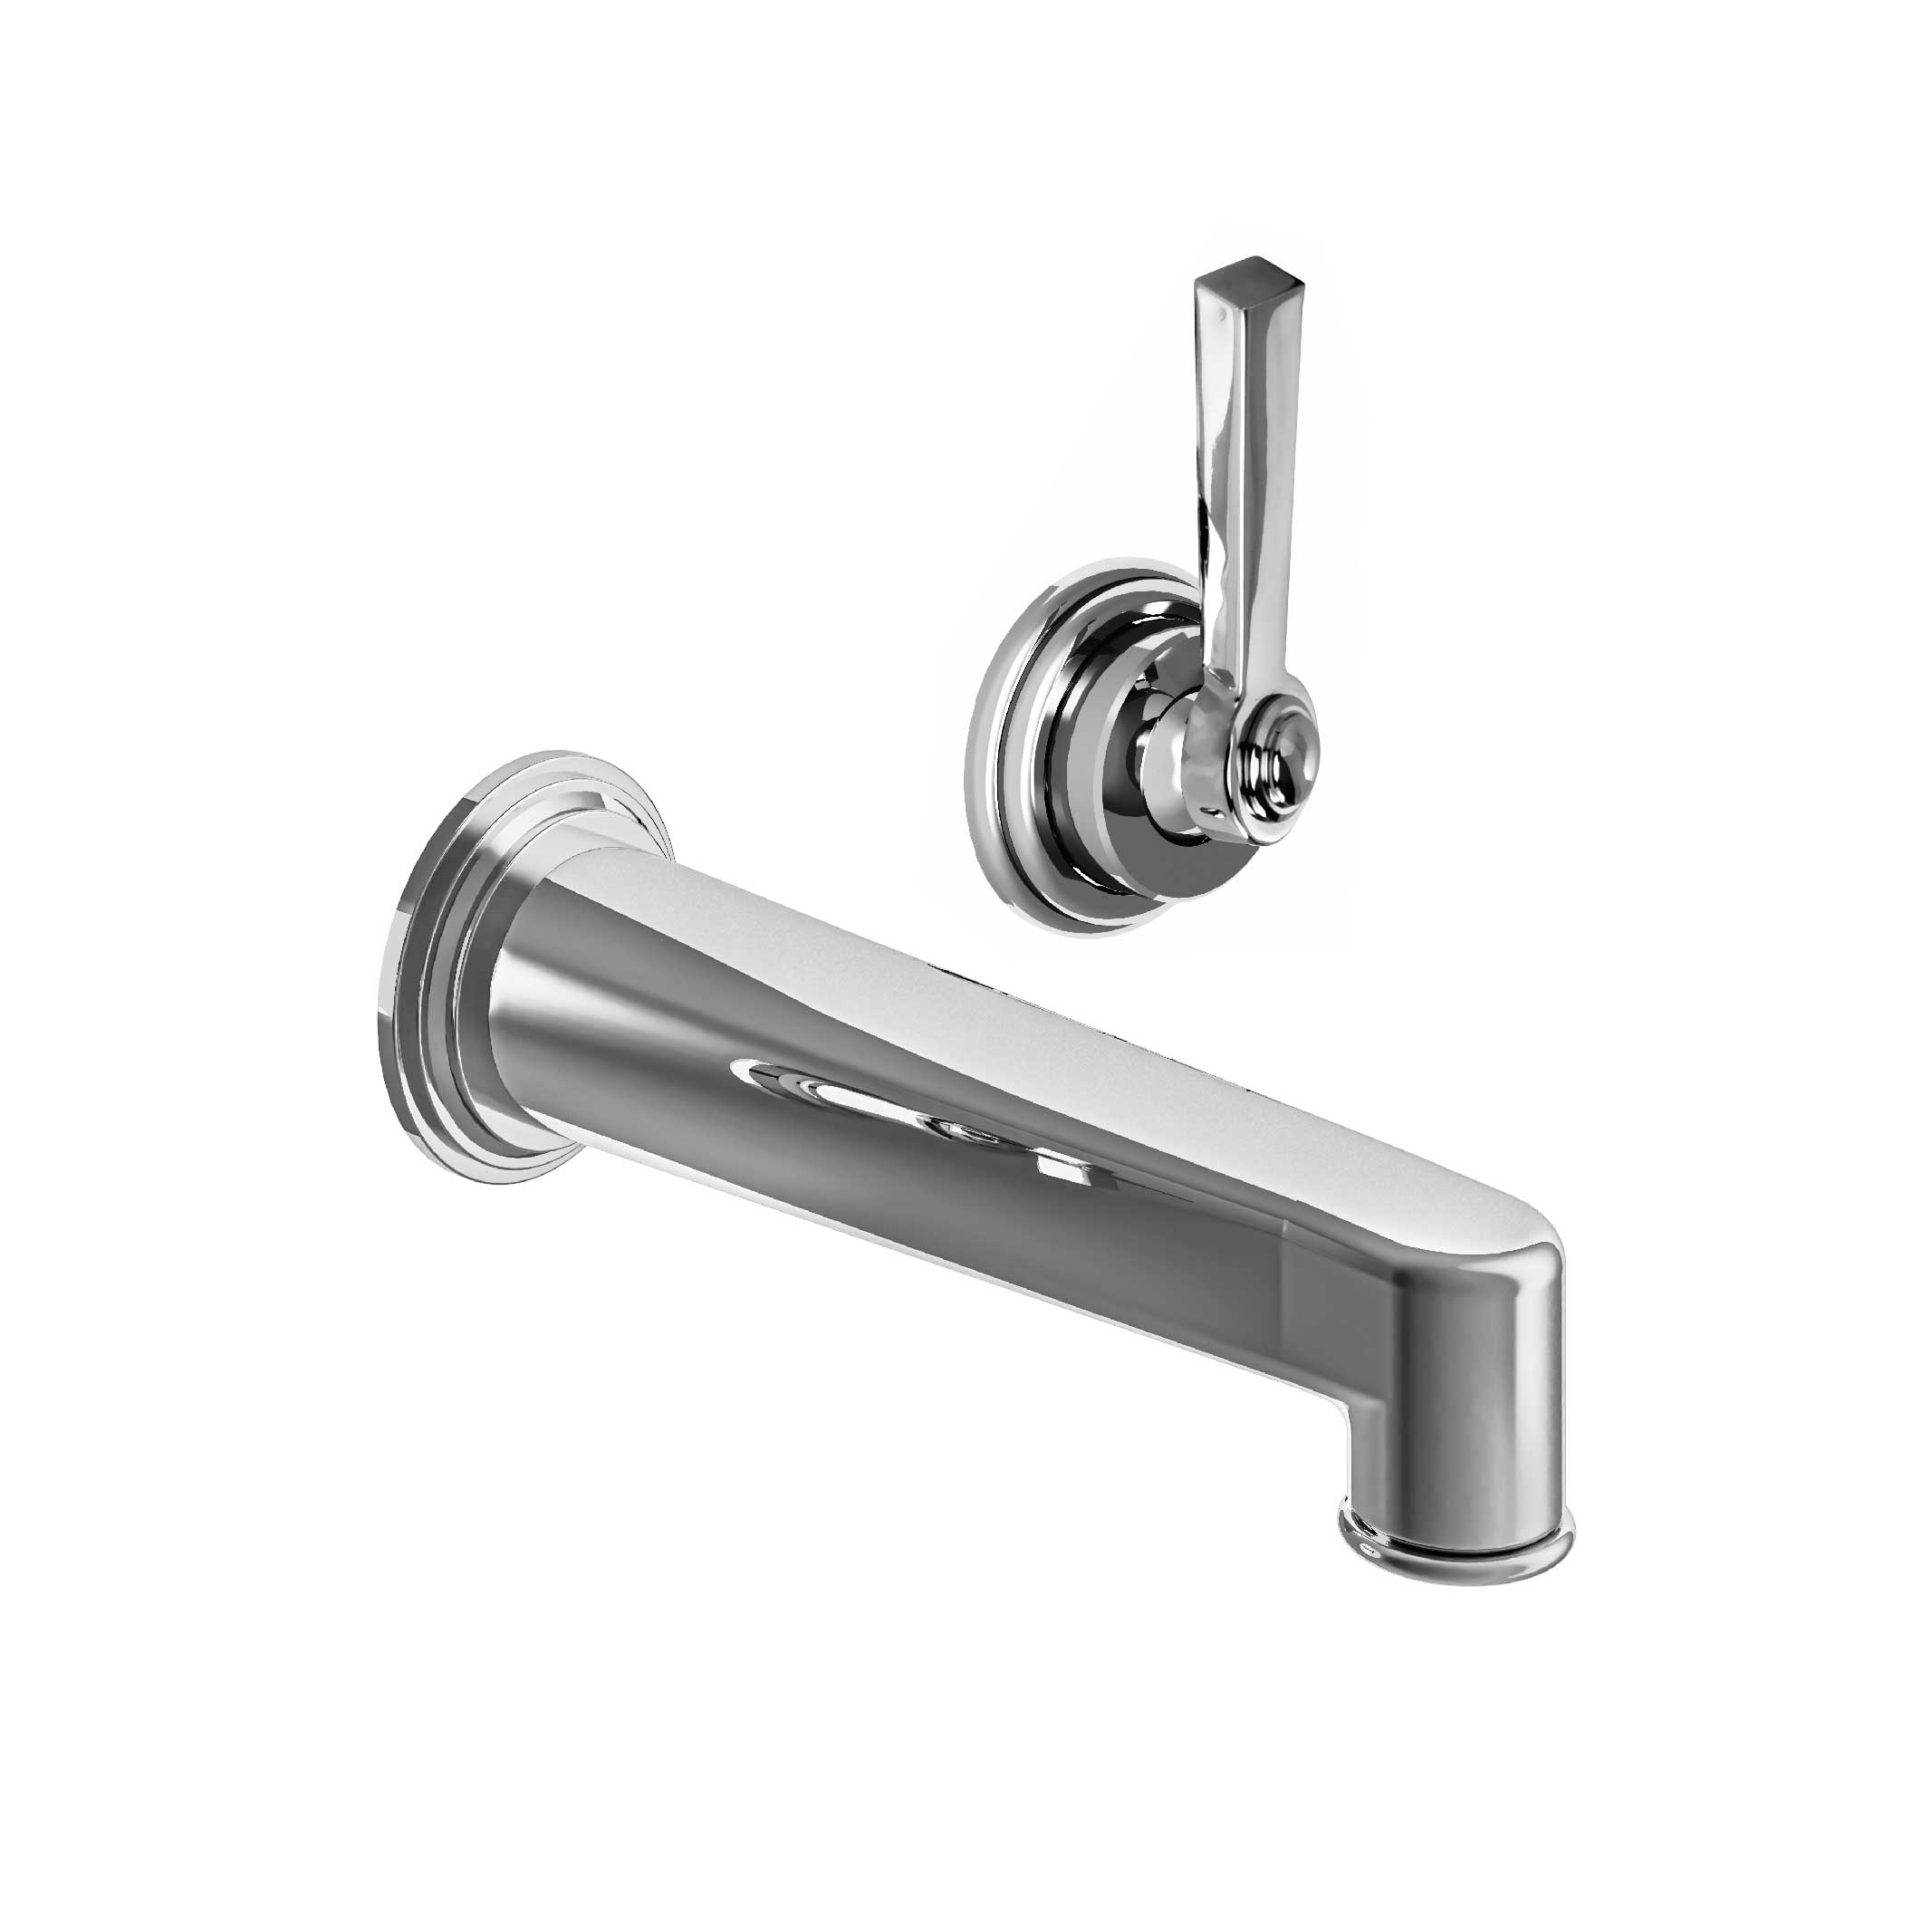 M60-1203M Wall mounted 2-hole single lever basin mixer, built-in